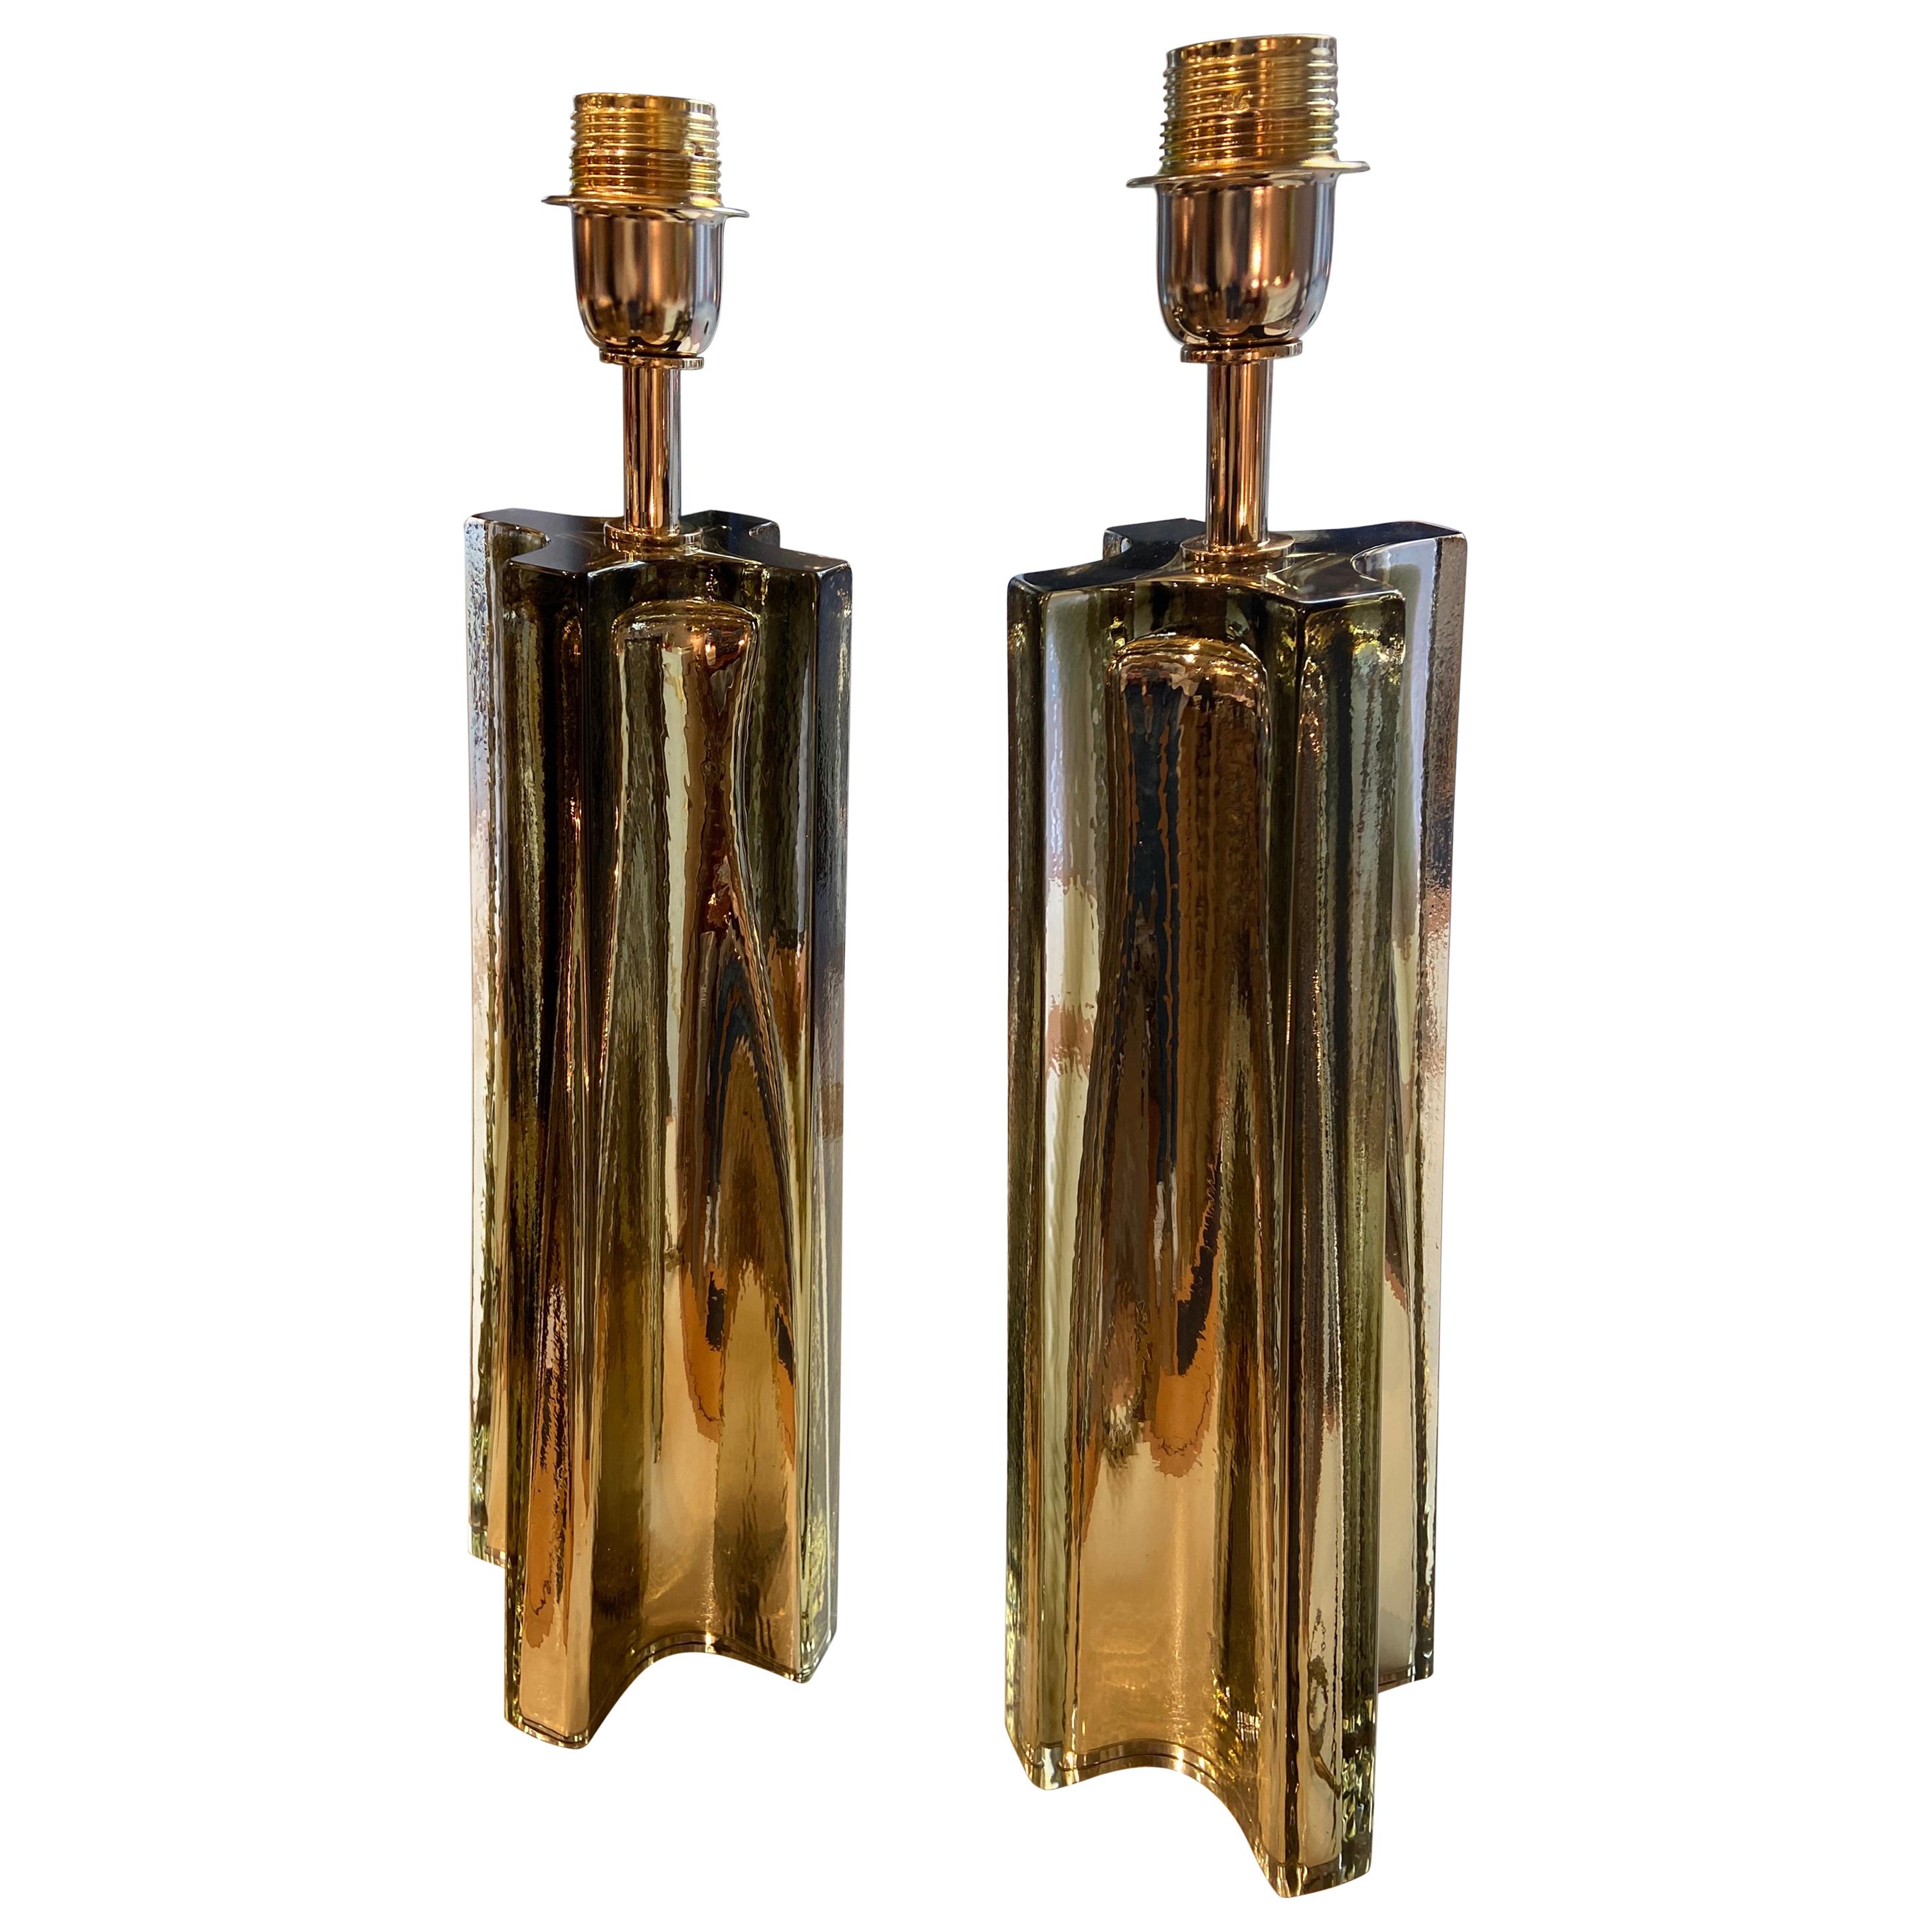 Stefano Toso, Pair of Golden Murano Table Lamps, 1980